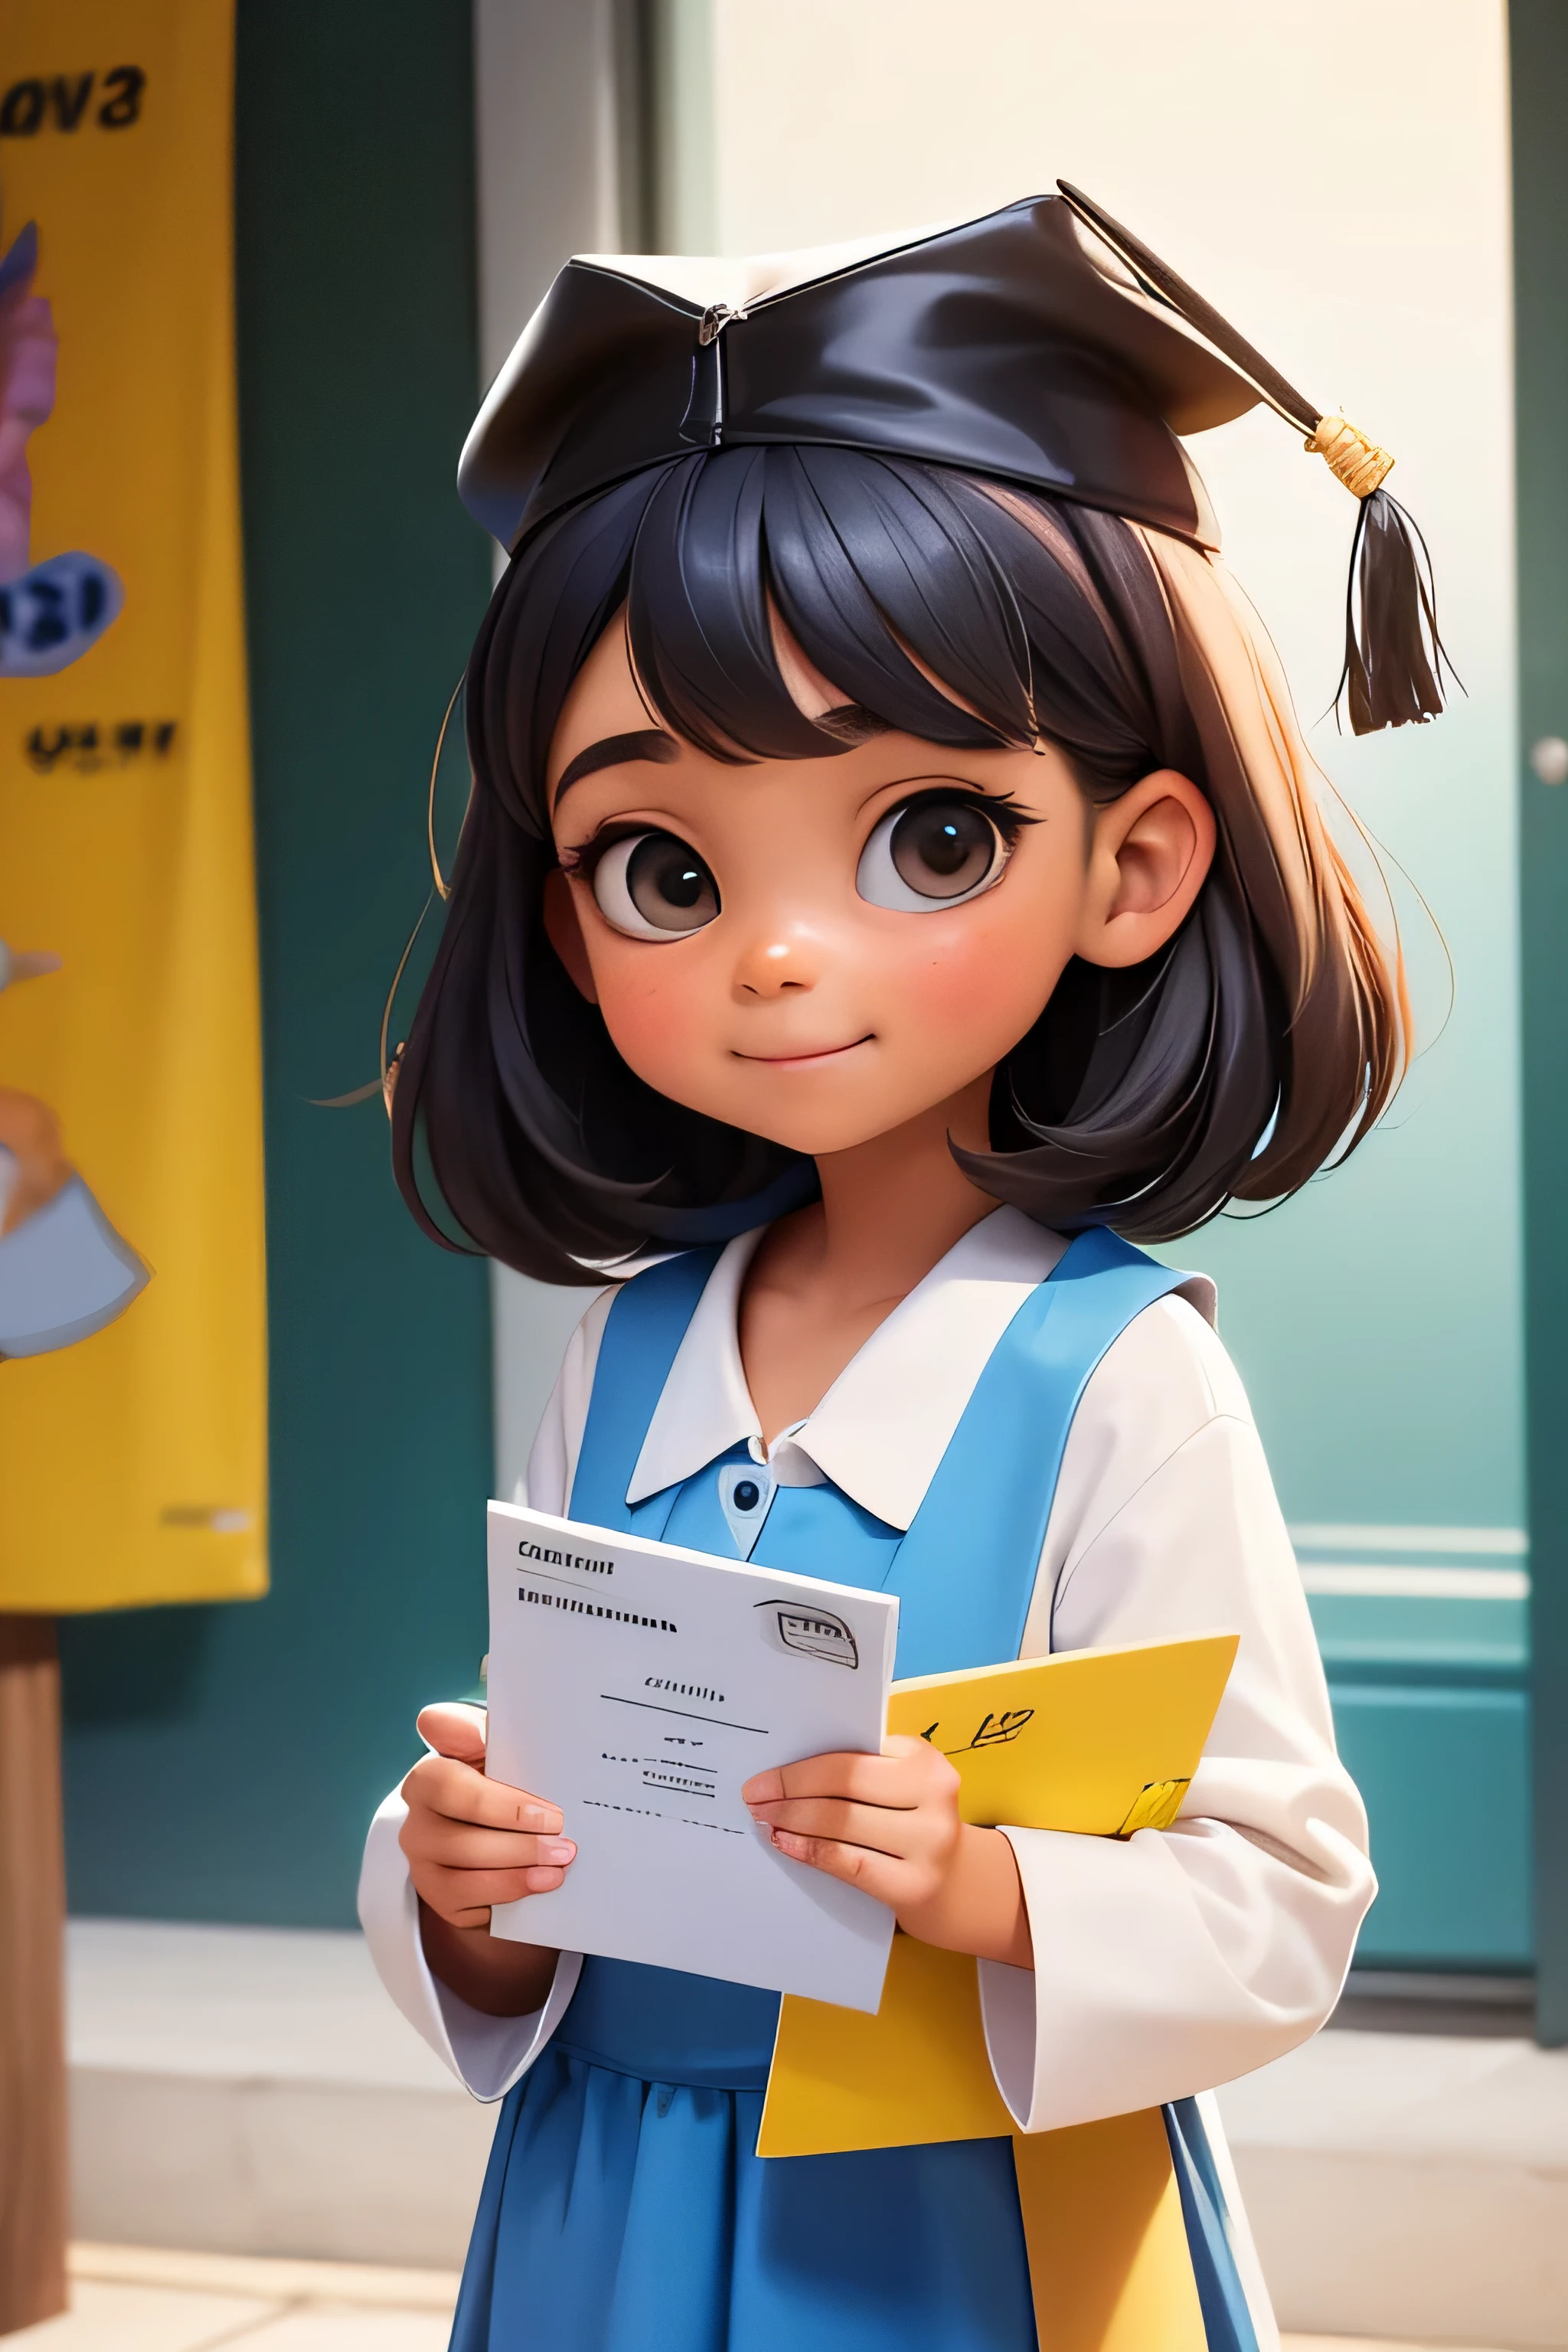 an 8 year old girl wearing a graduation gown and graduation cap, with a diploma, wearing an academic gown, Postgraduate, graduation photo, in pixar cartoon style, Mischievous, school girl, full body.